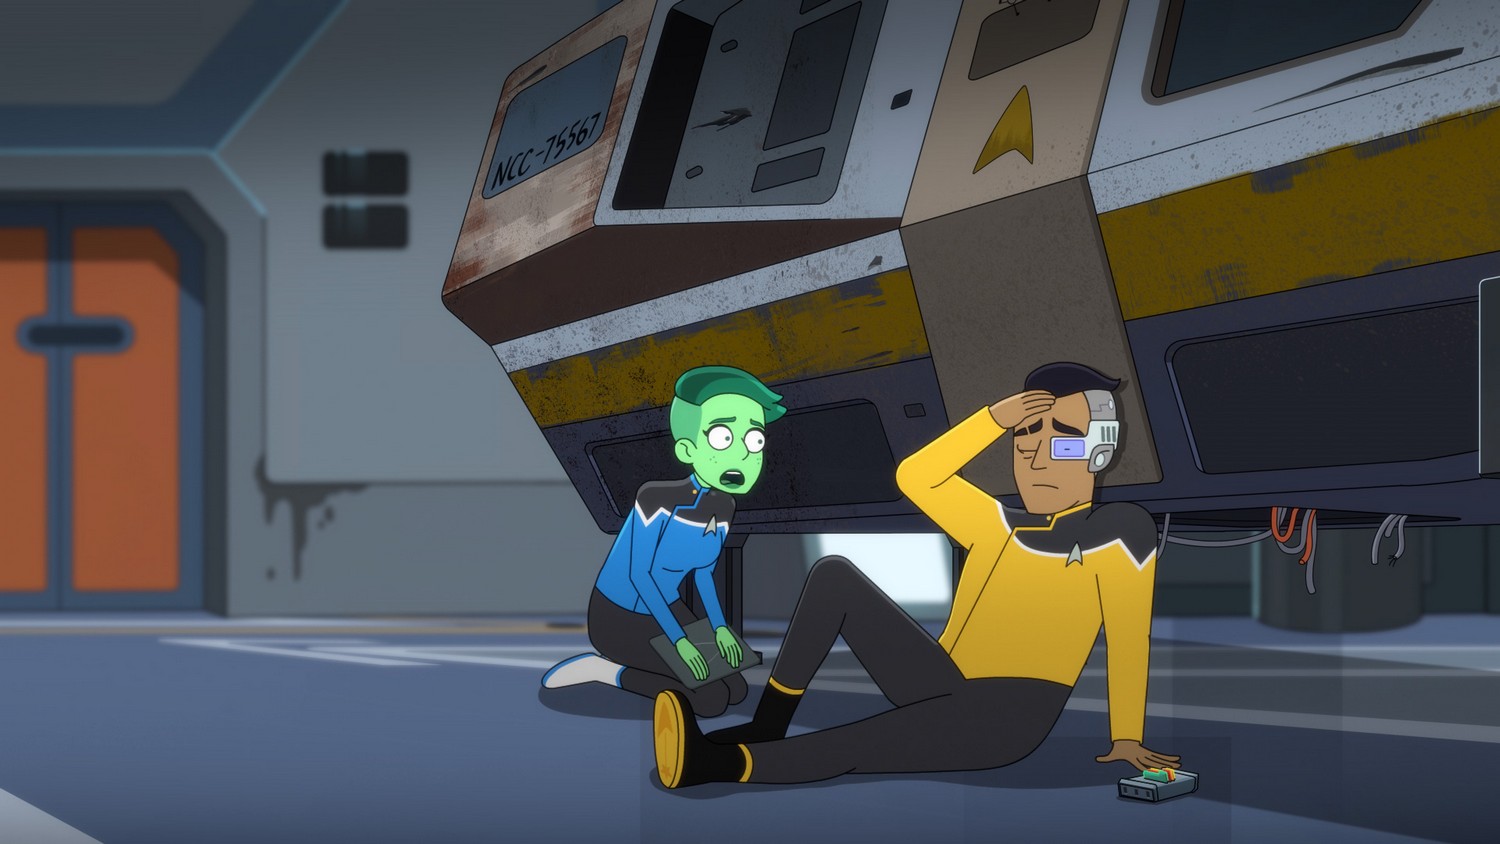 Star Trek: Lower Decks season 3 episode 5 review Reflections is lousy step in new canon storyline direction